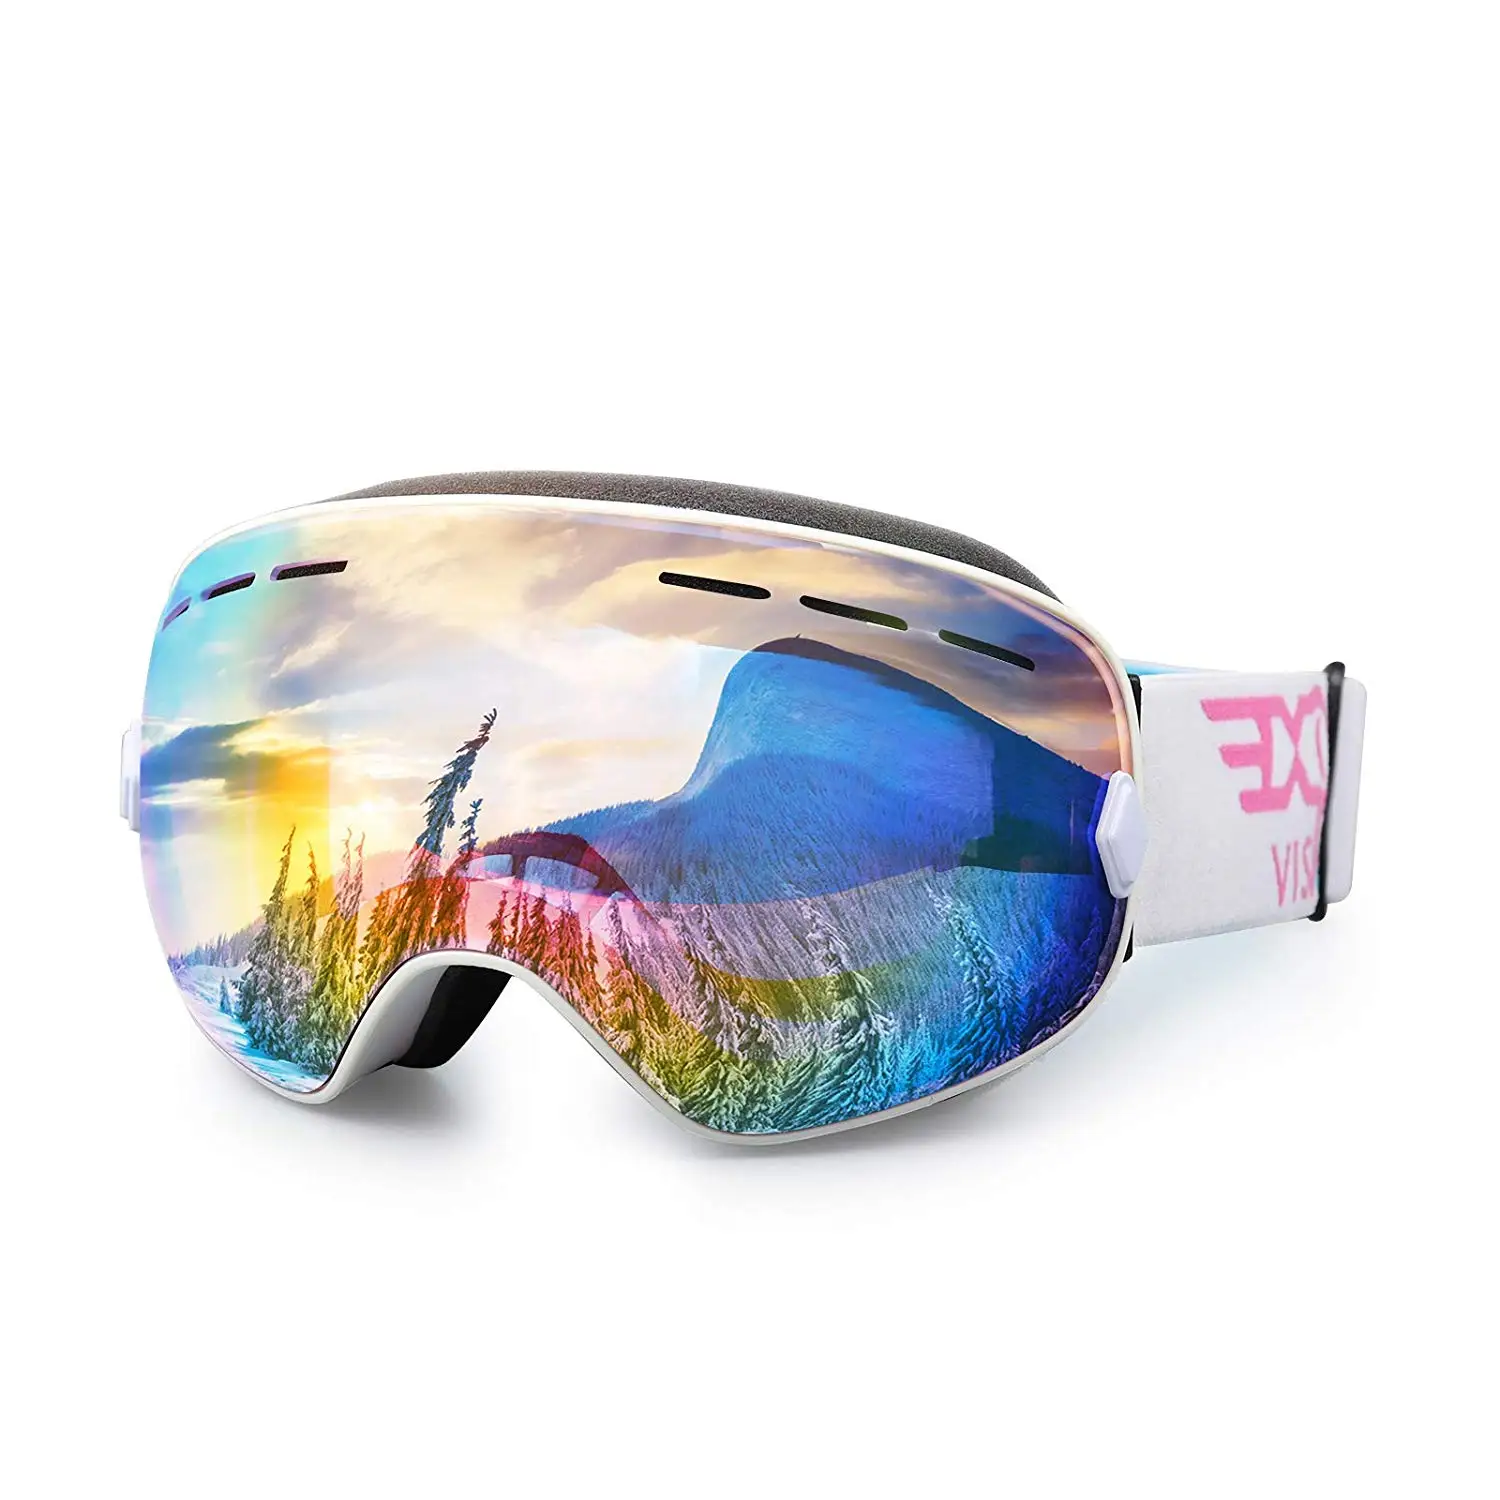 Ski Goggles for Men Women and Youth, Double Layers Lens Anti Fog OTG Winter Sports Snow Goggles for Skiing and Snowboarding